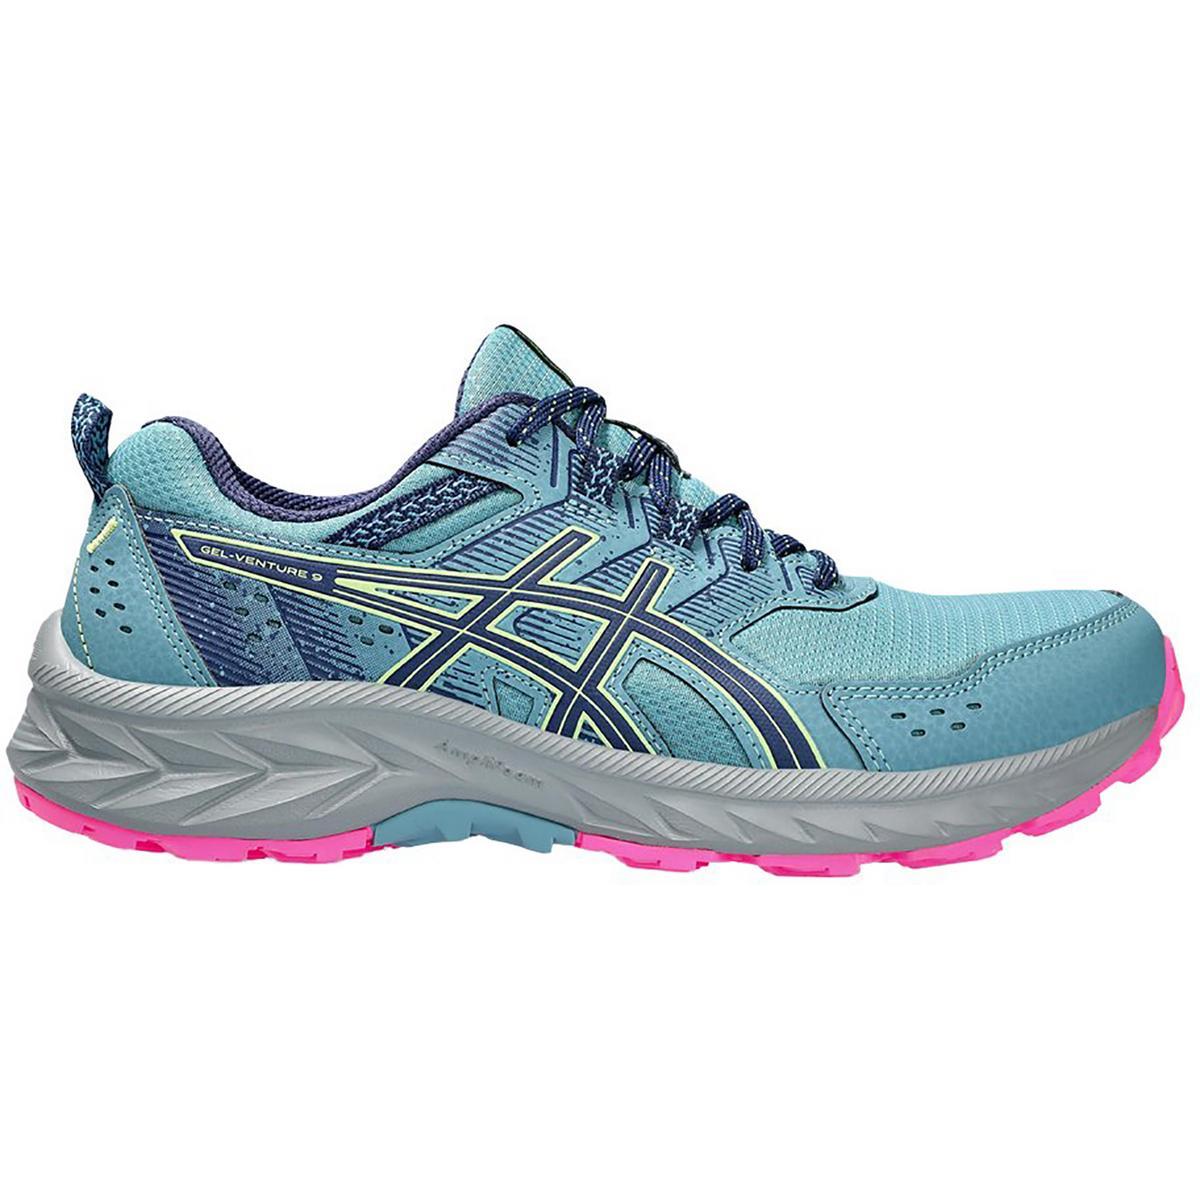 Asics Womens Gel-venture 9 Gym Athletic and Training Shoes Sneakers Bhfo 6559 Gris Blue/Deep Ocean